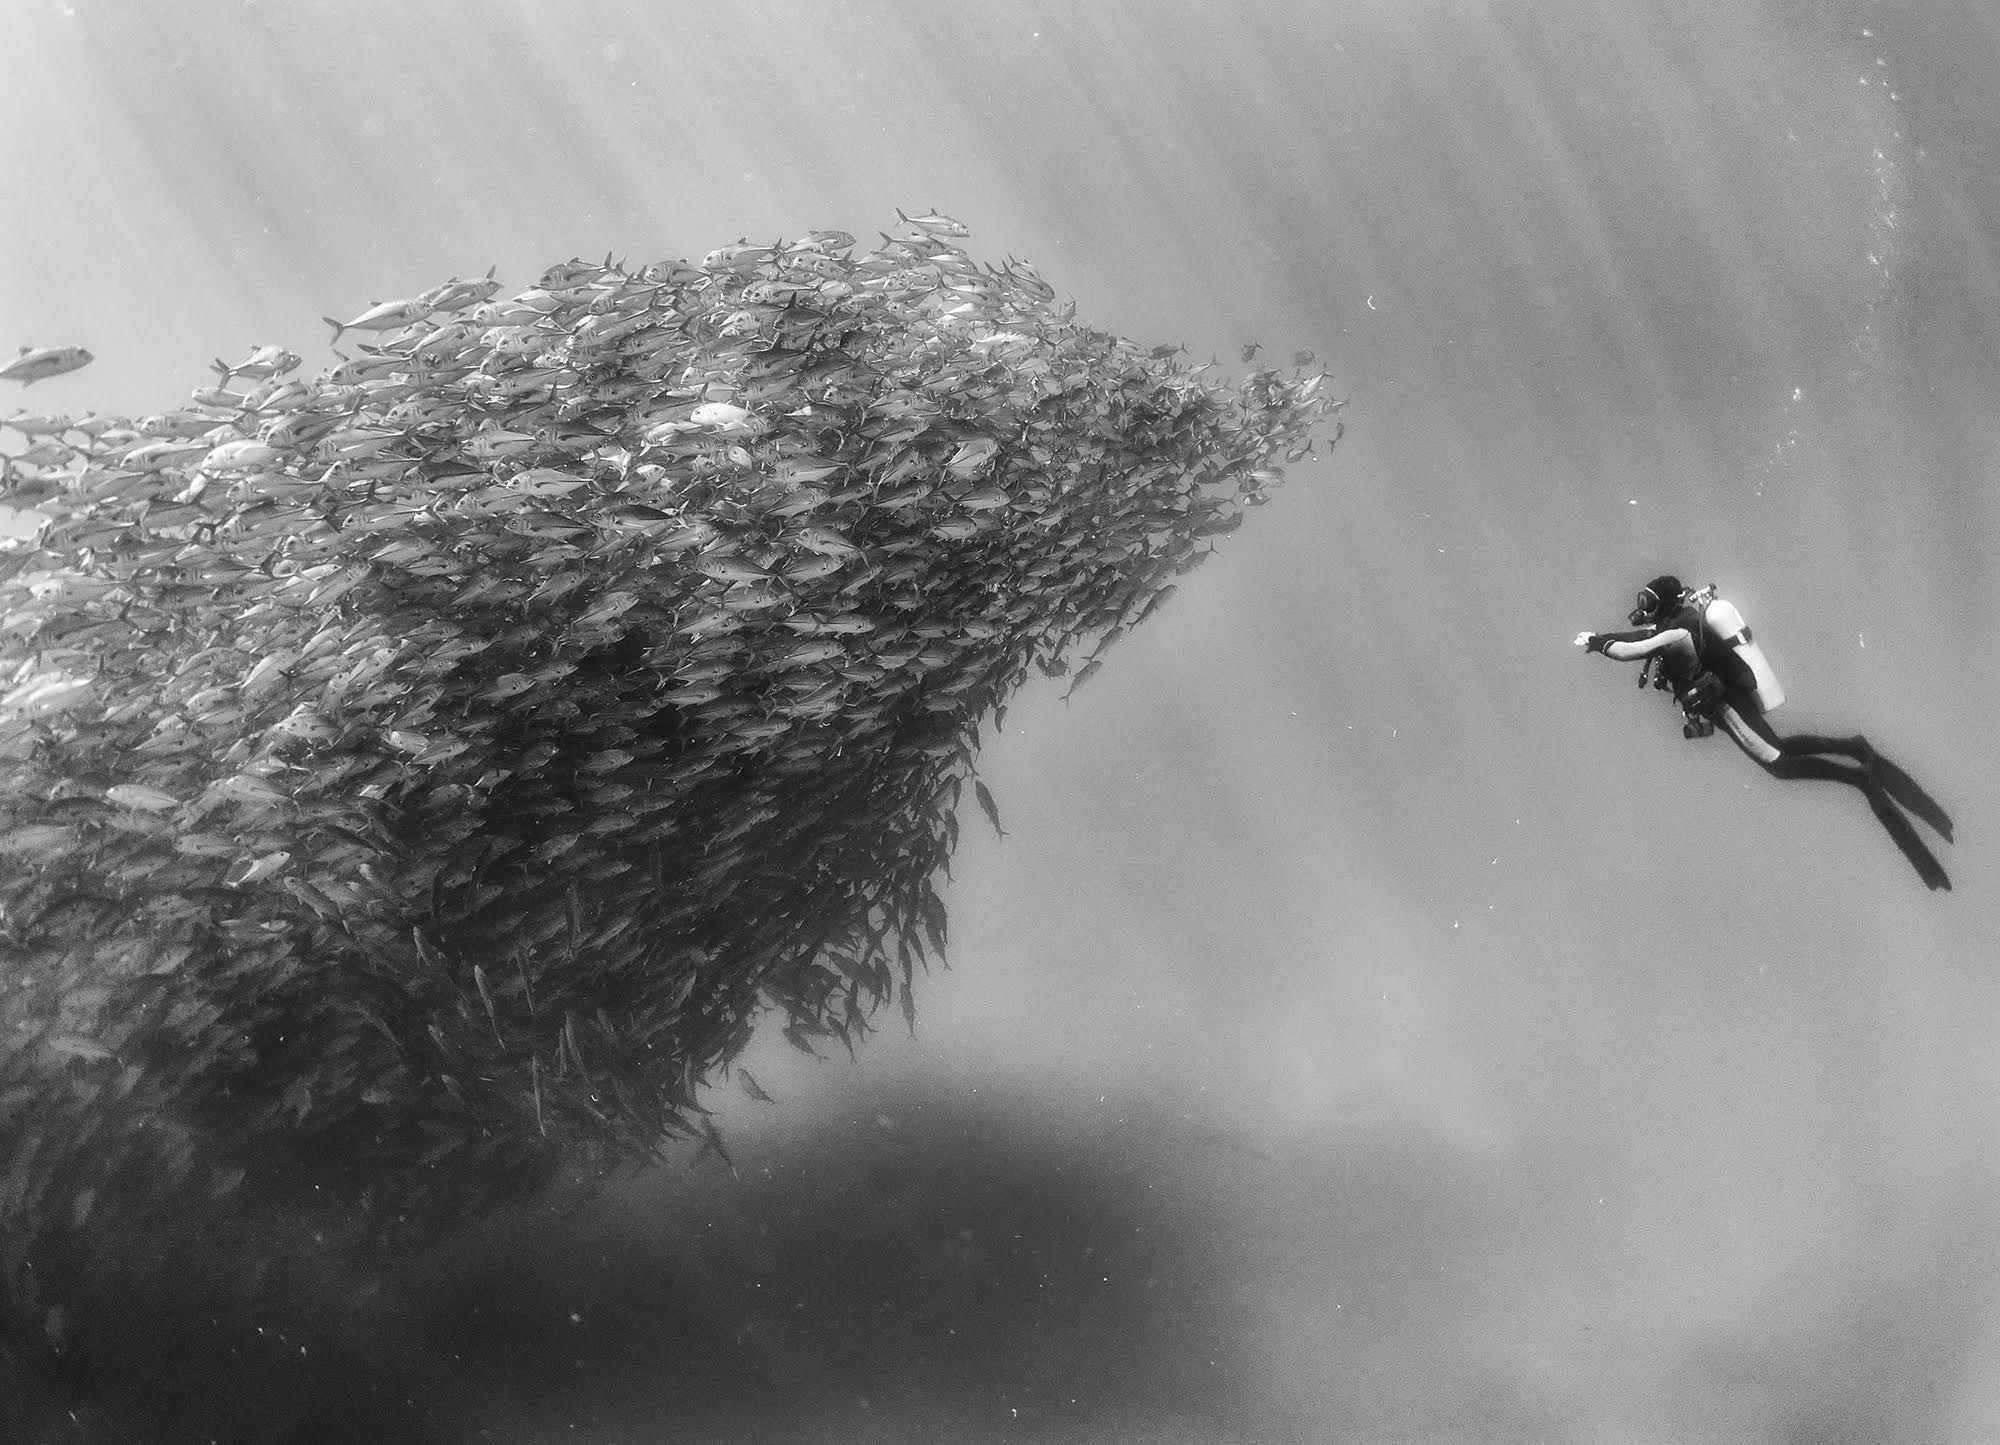 Black and white underwater photography by Anuar Patjane - school of fish